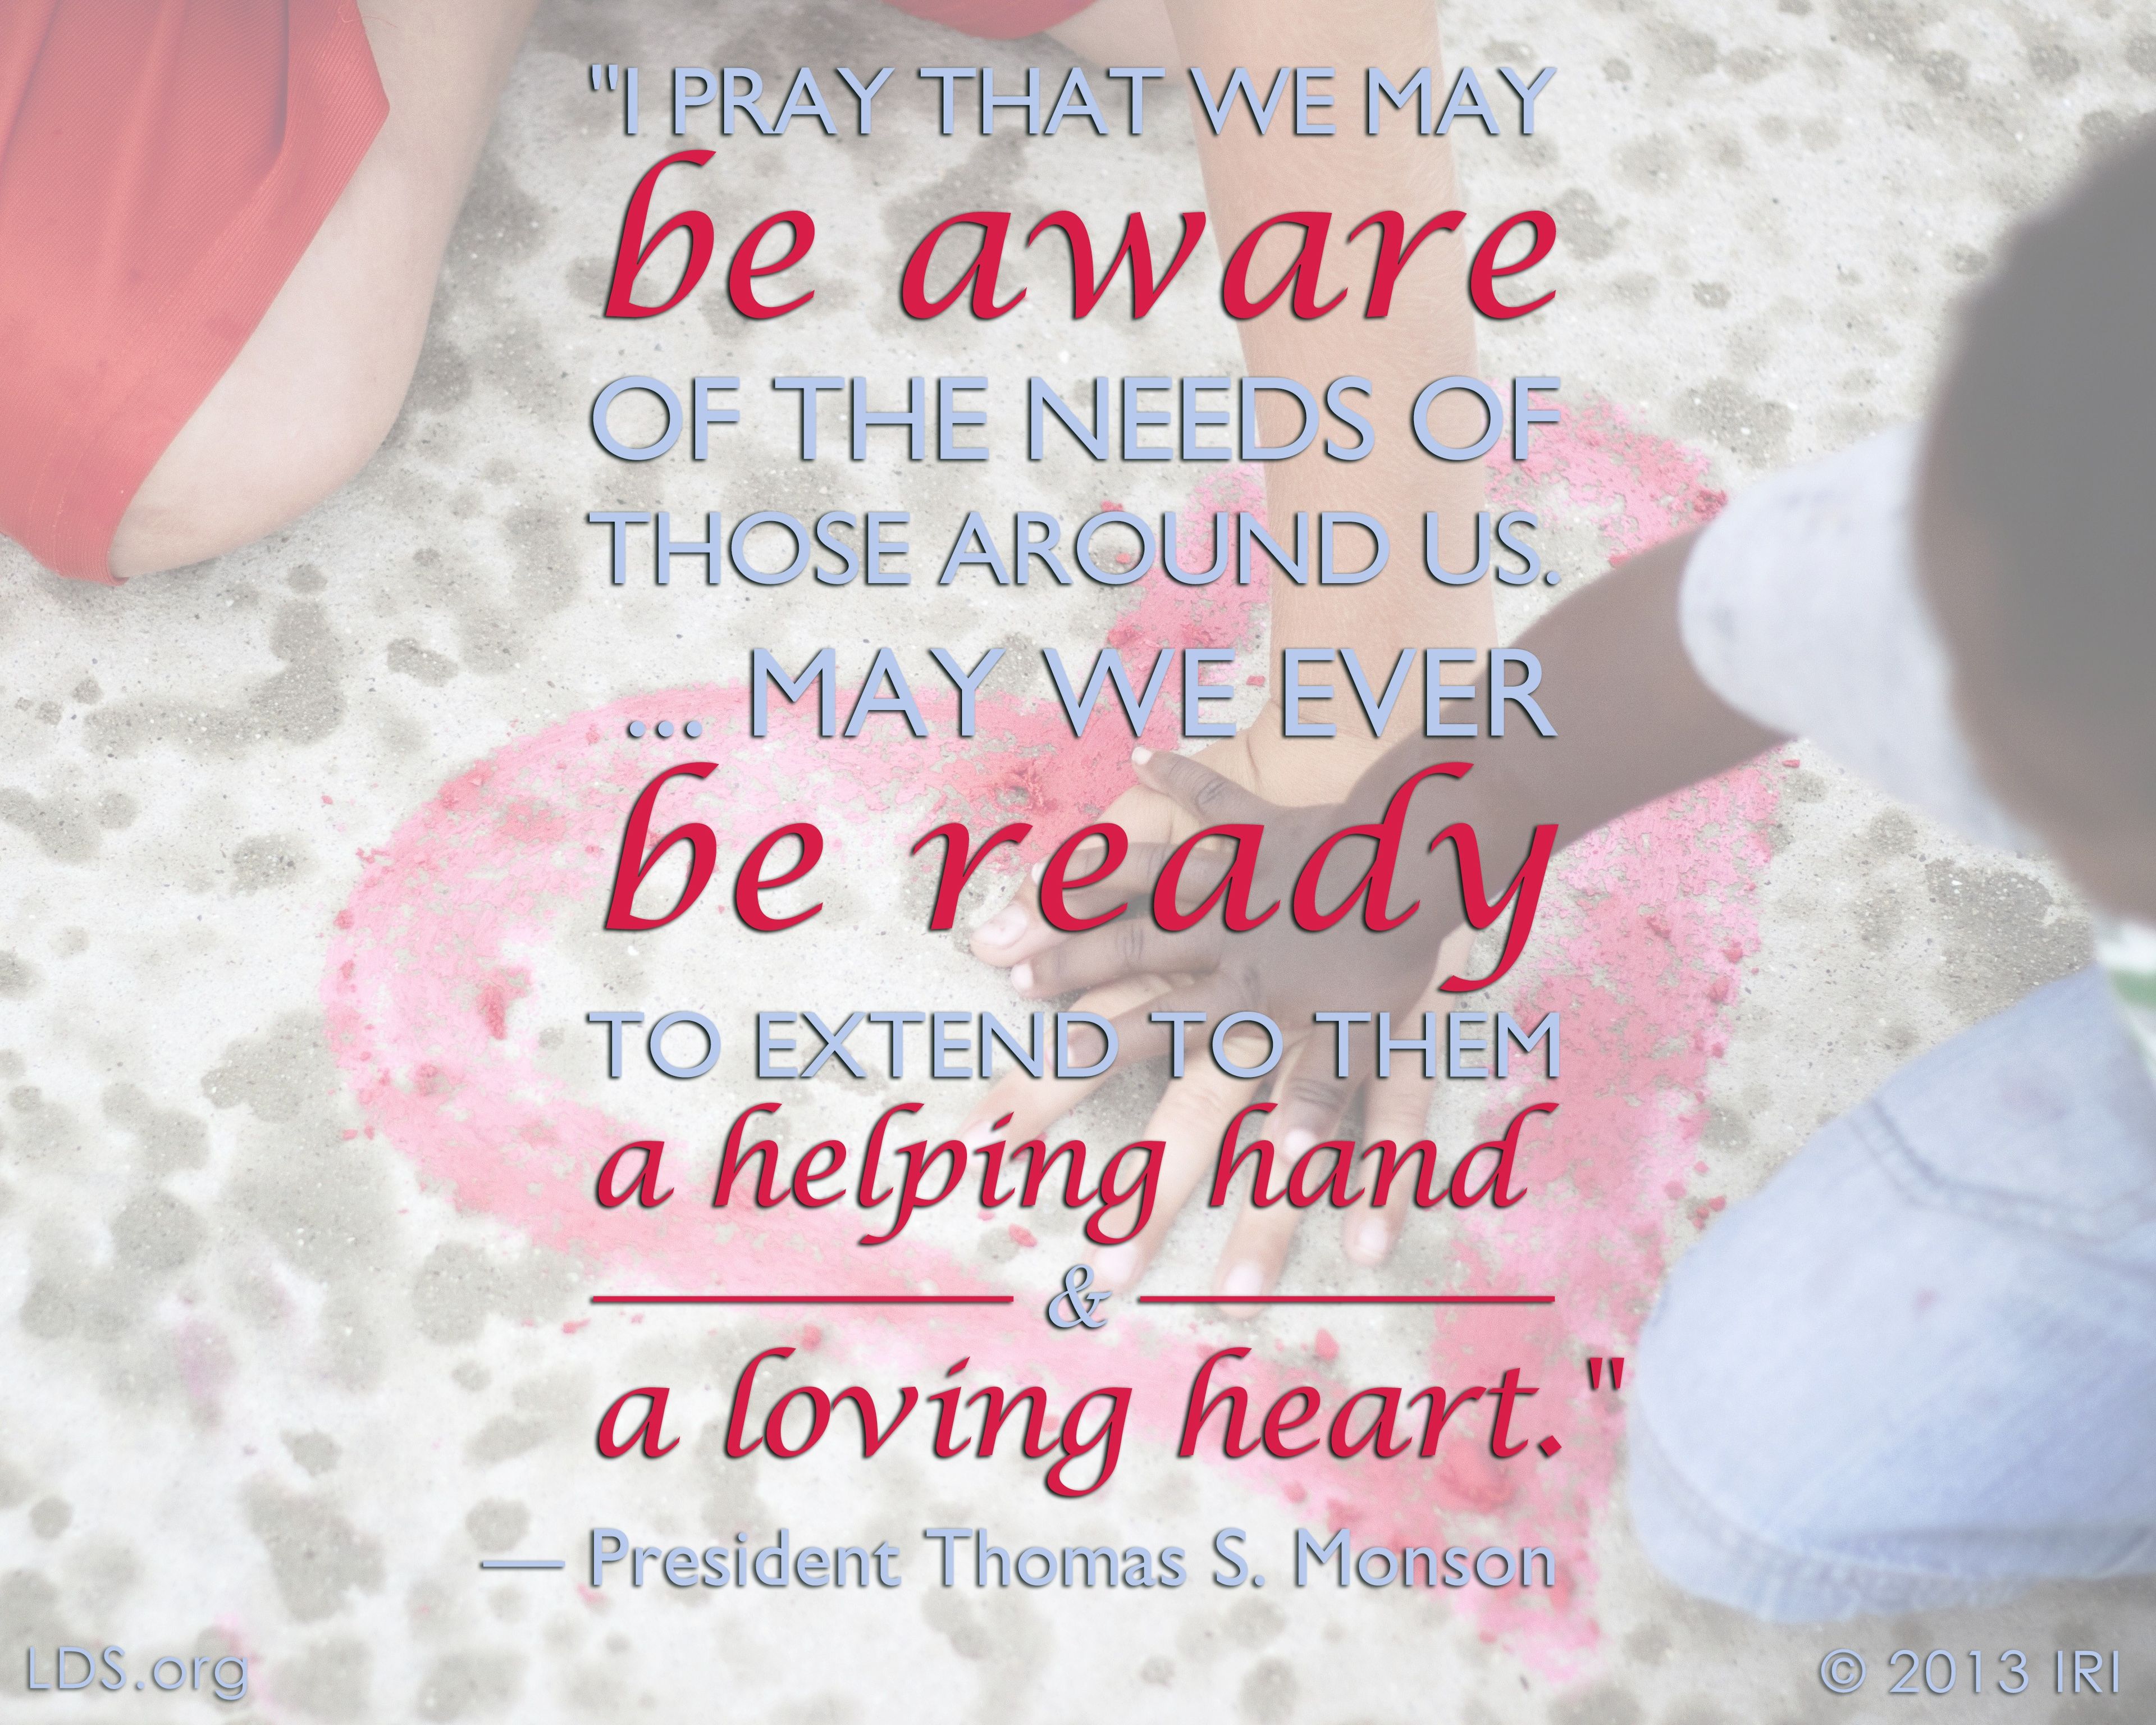 “I pray that we may be aware of the needs of those around us. … May we ever be ready to extend to them a helping hand and a loving heart.”—President Thomas S. Monson, “Until We Meet Again” © undefined ipCode 1.